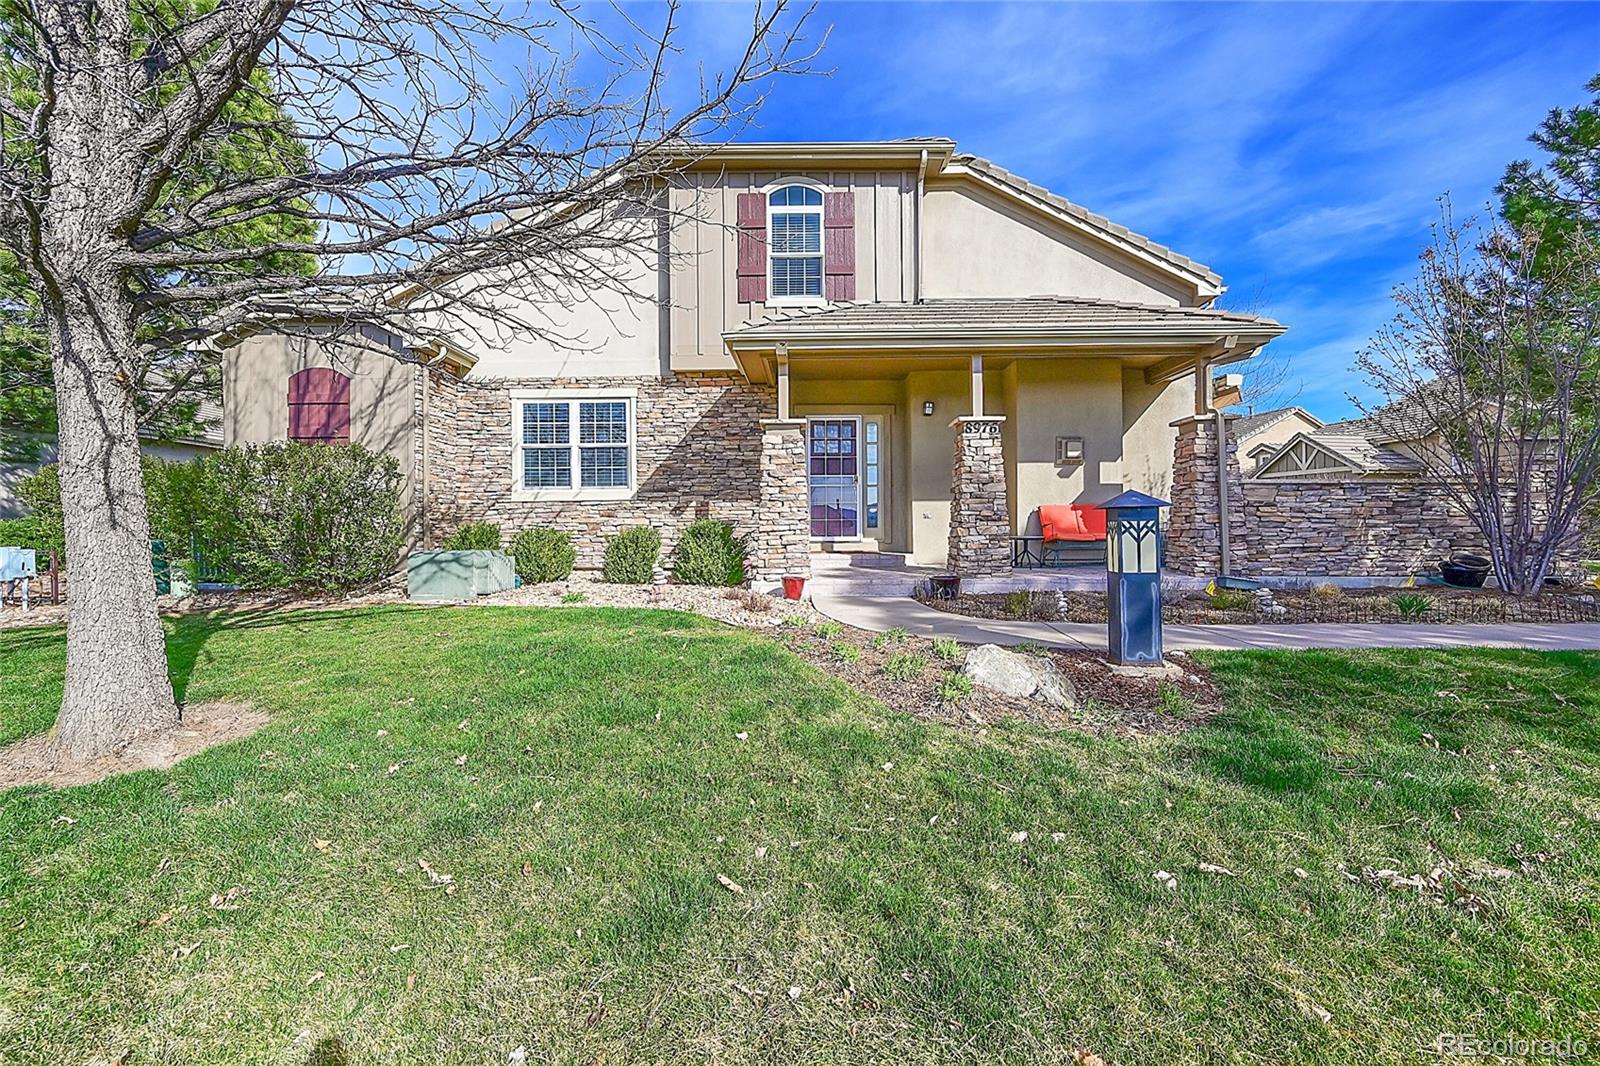 Report Image for 8976  Old Tom Morris Circle,Highlands Ranch, Colorado